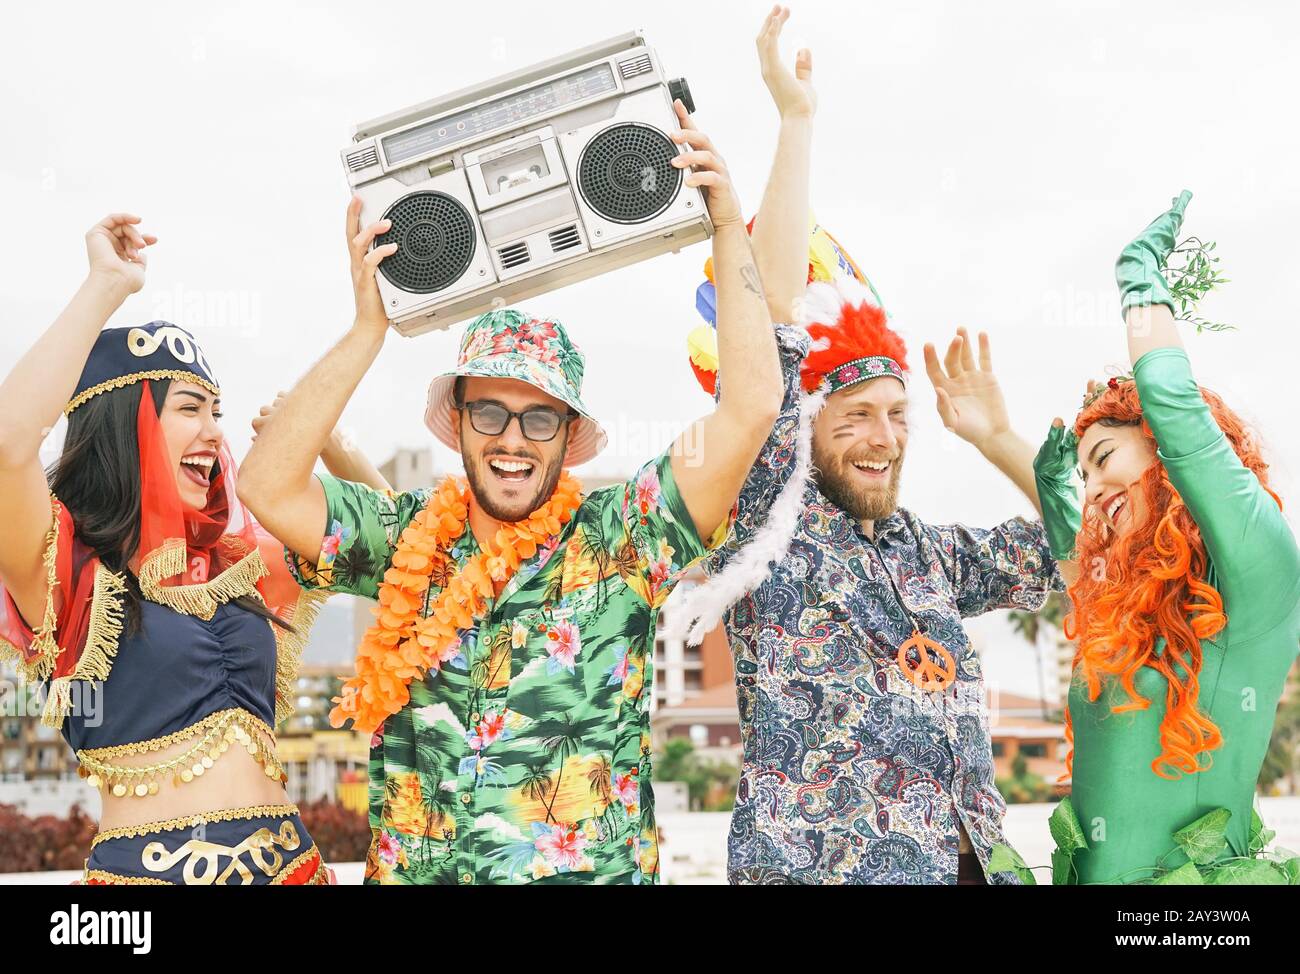 Happy friends celebrating carnival party outdoor - Young crazy people having fun wearing costumes listening music with vintage boombox stereo Stock Photo